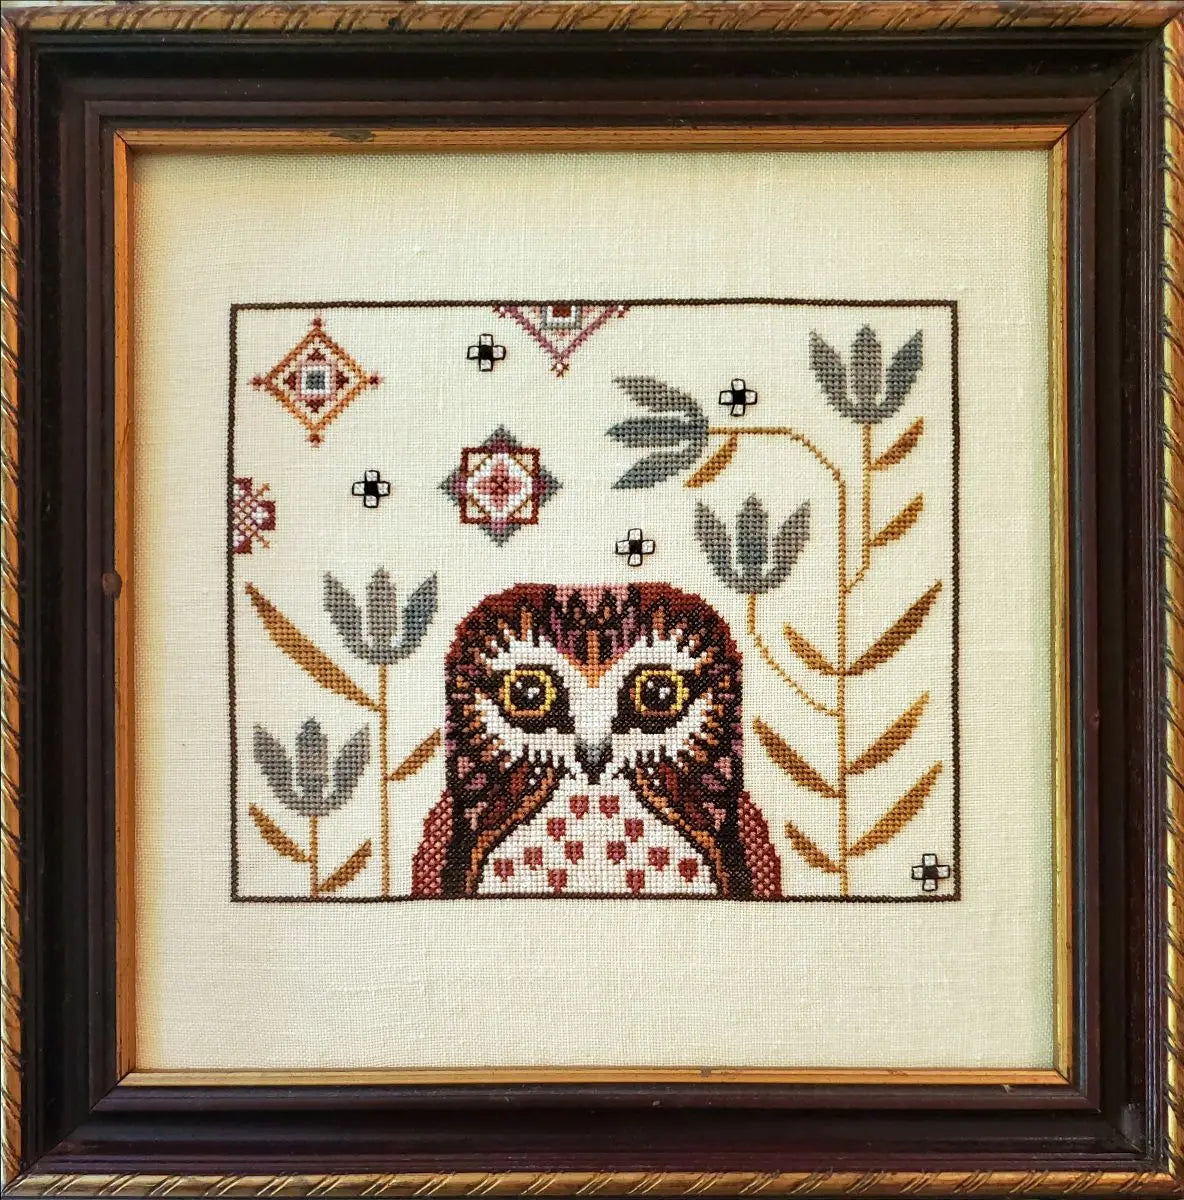 Oona Owl by The Artsy Housewife The Artsy Housewife